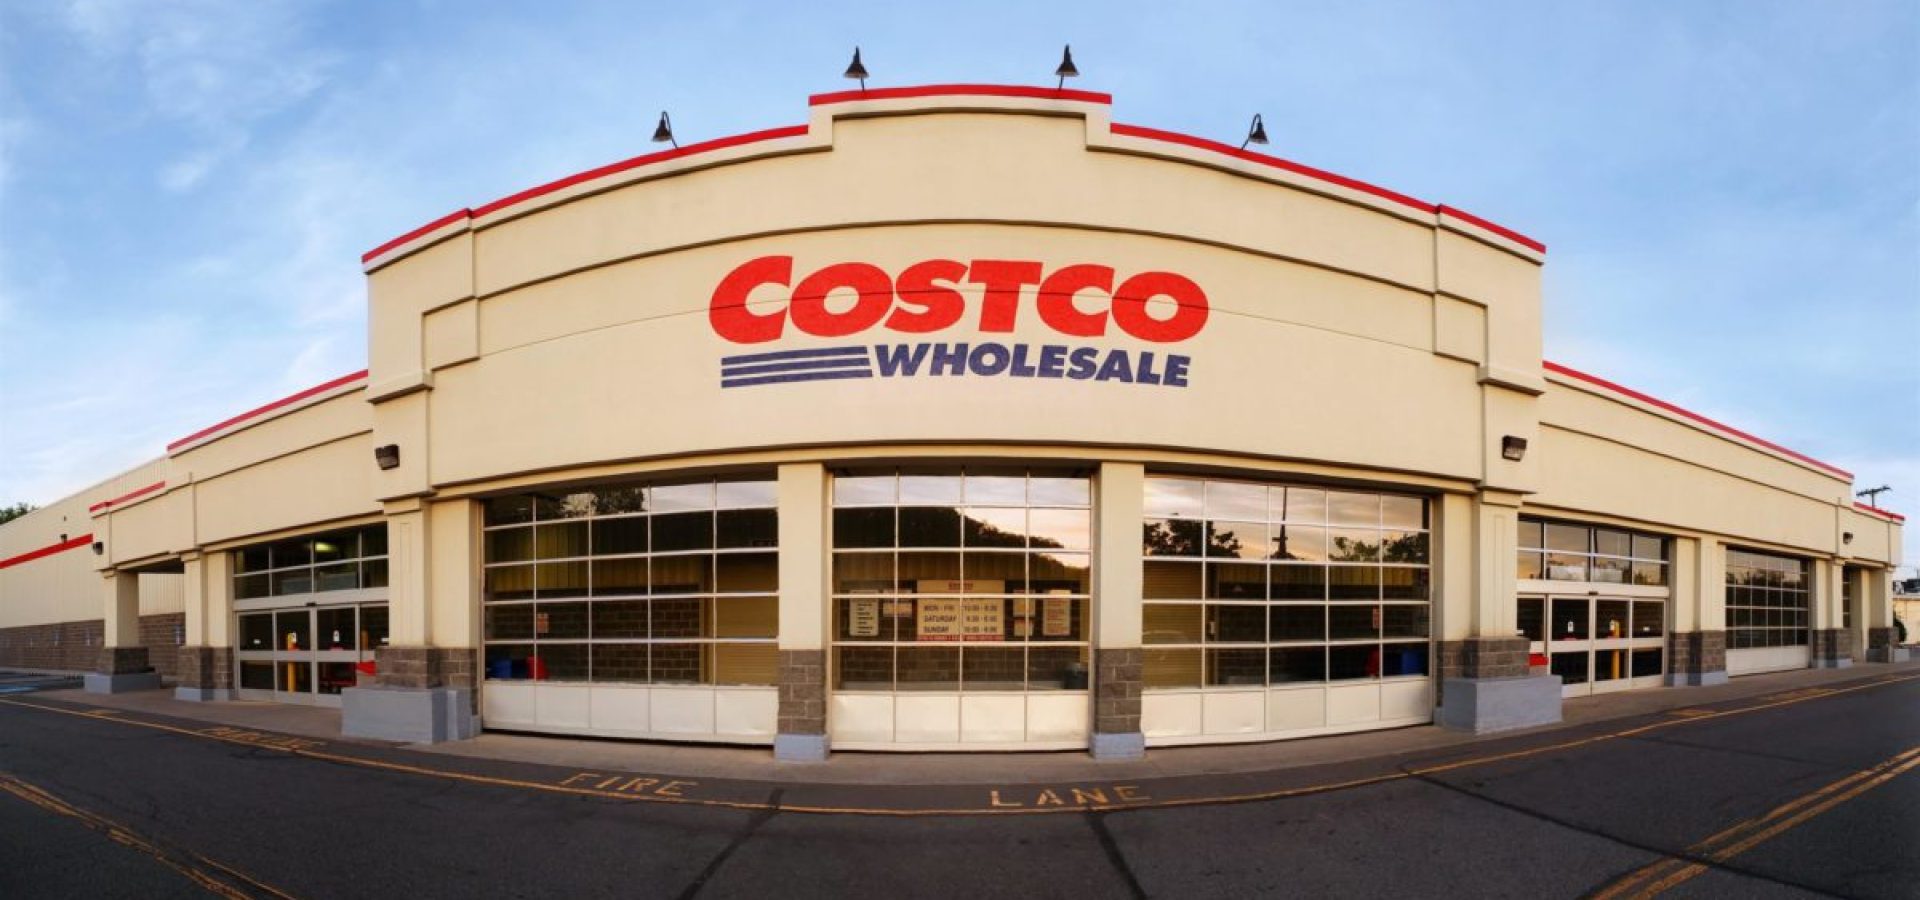 Costco and financial results